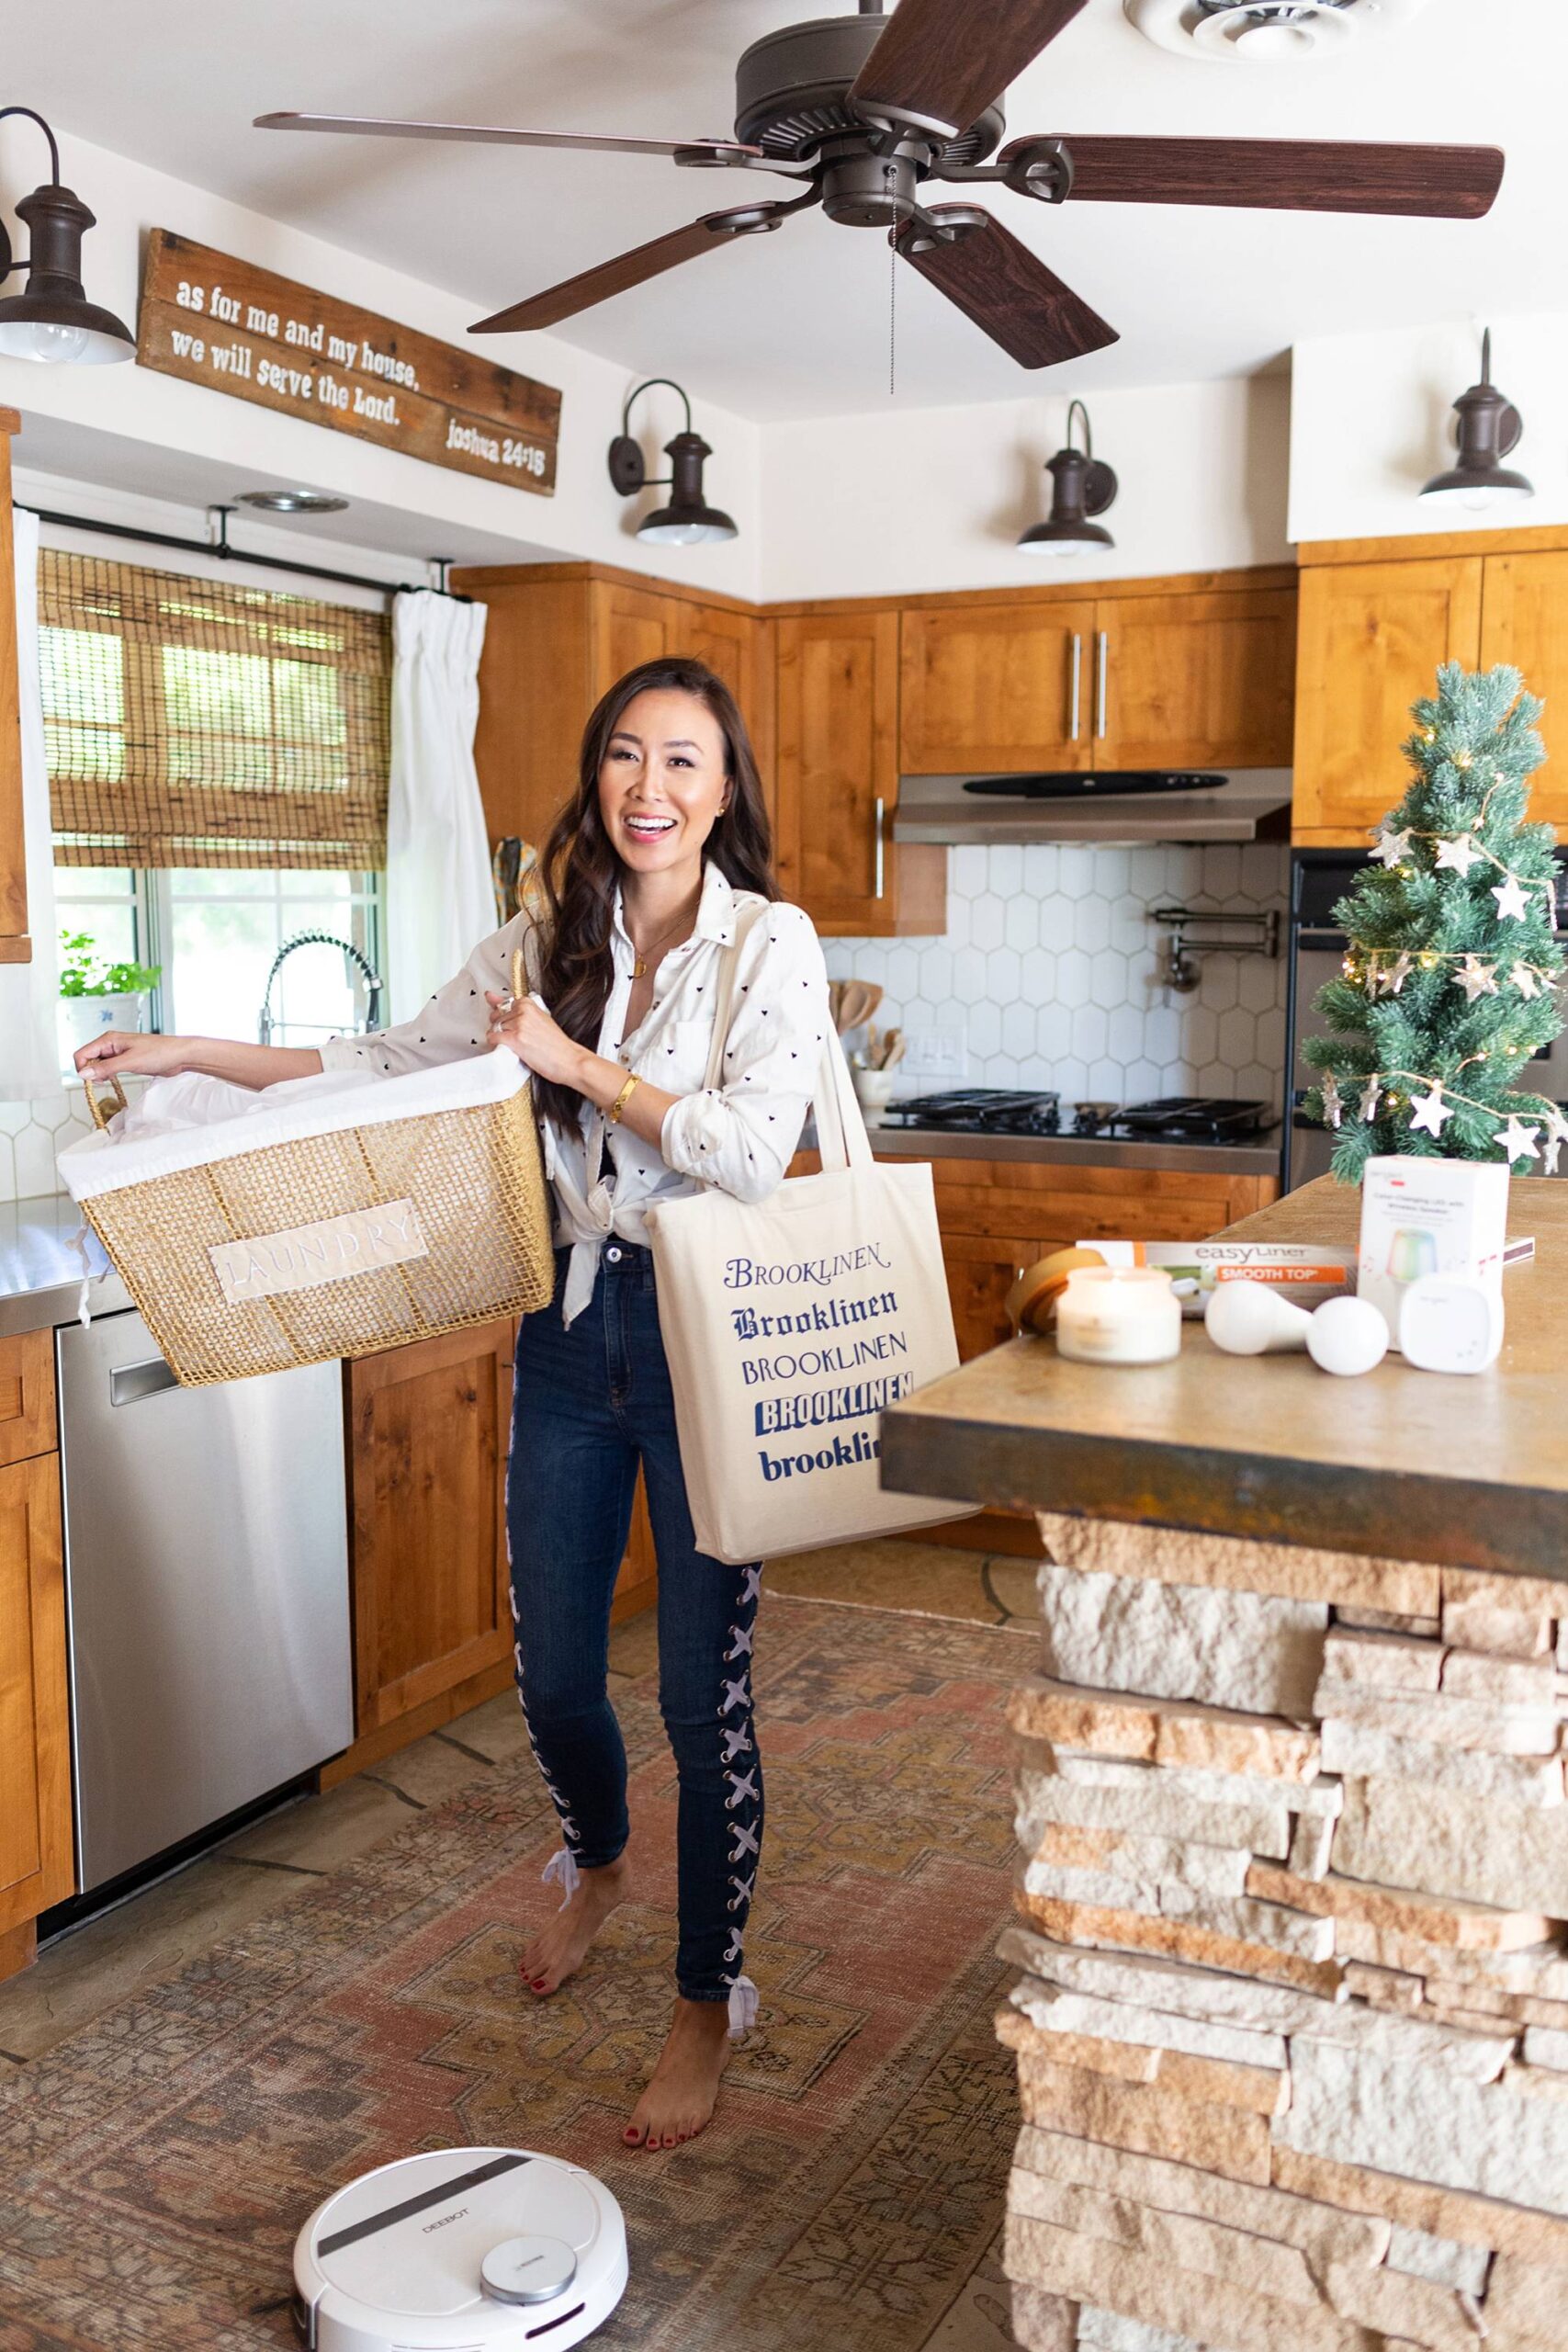 lifestyle blogger holding basket of laundry and some goodies in a babbleboxx getting home ready for thanksgiving and the holidays #kitchengoals #Kitchen